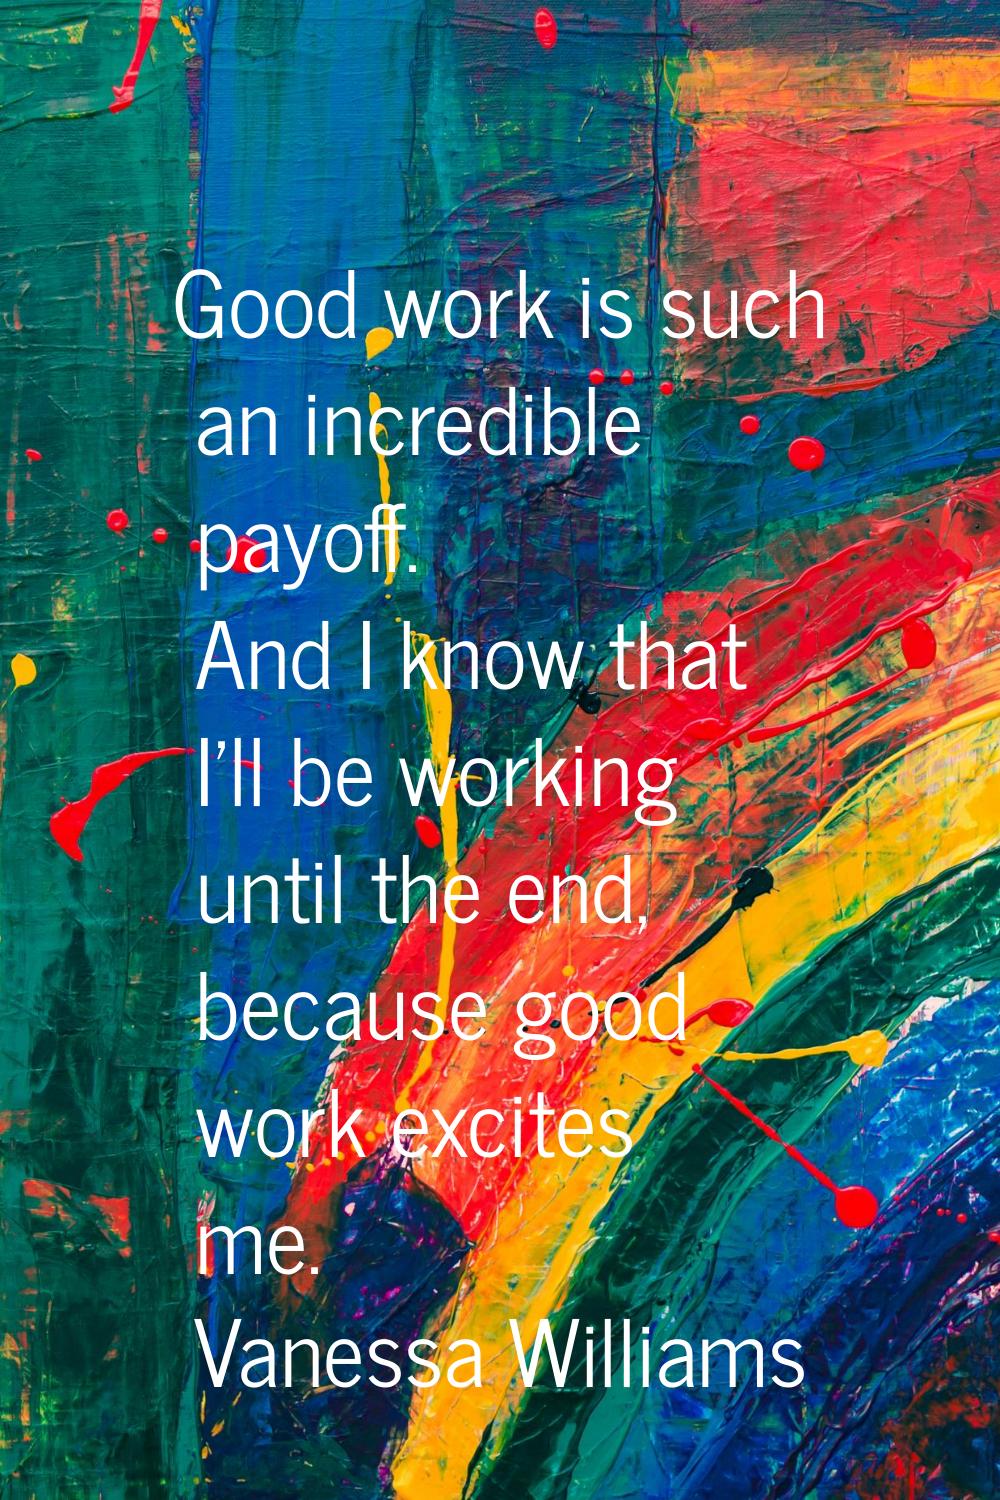 Good work is such an incredible payoff. And I know that I'll be working until the end, because good